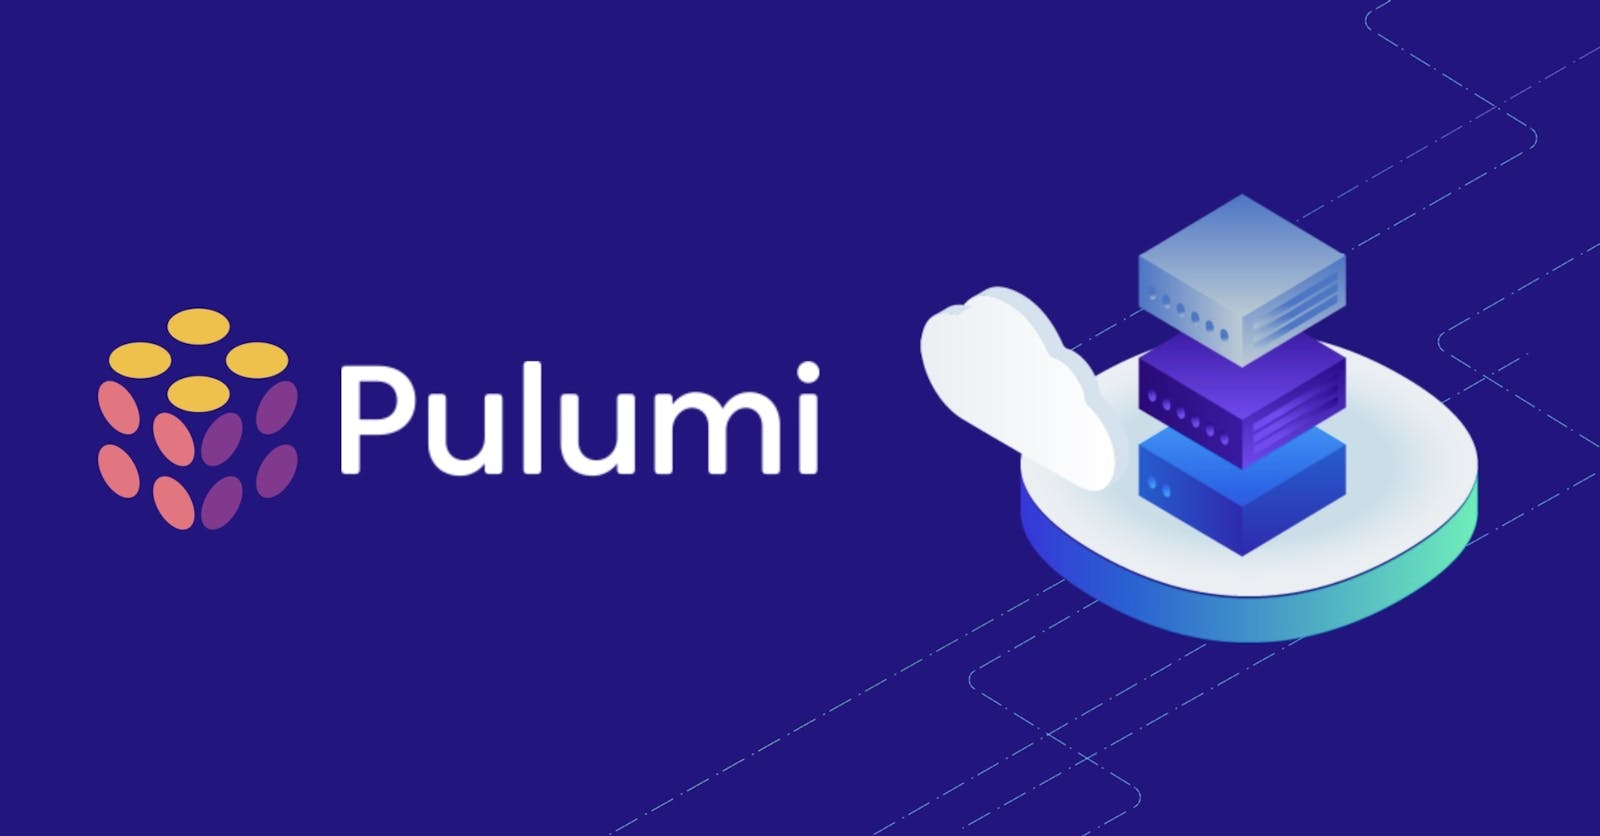 Pulumi: Infrastructure as Code Made Easy